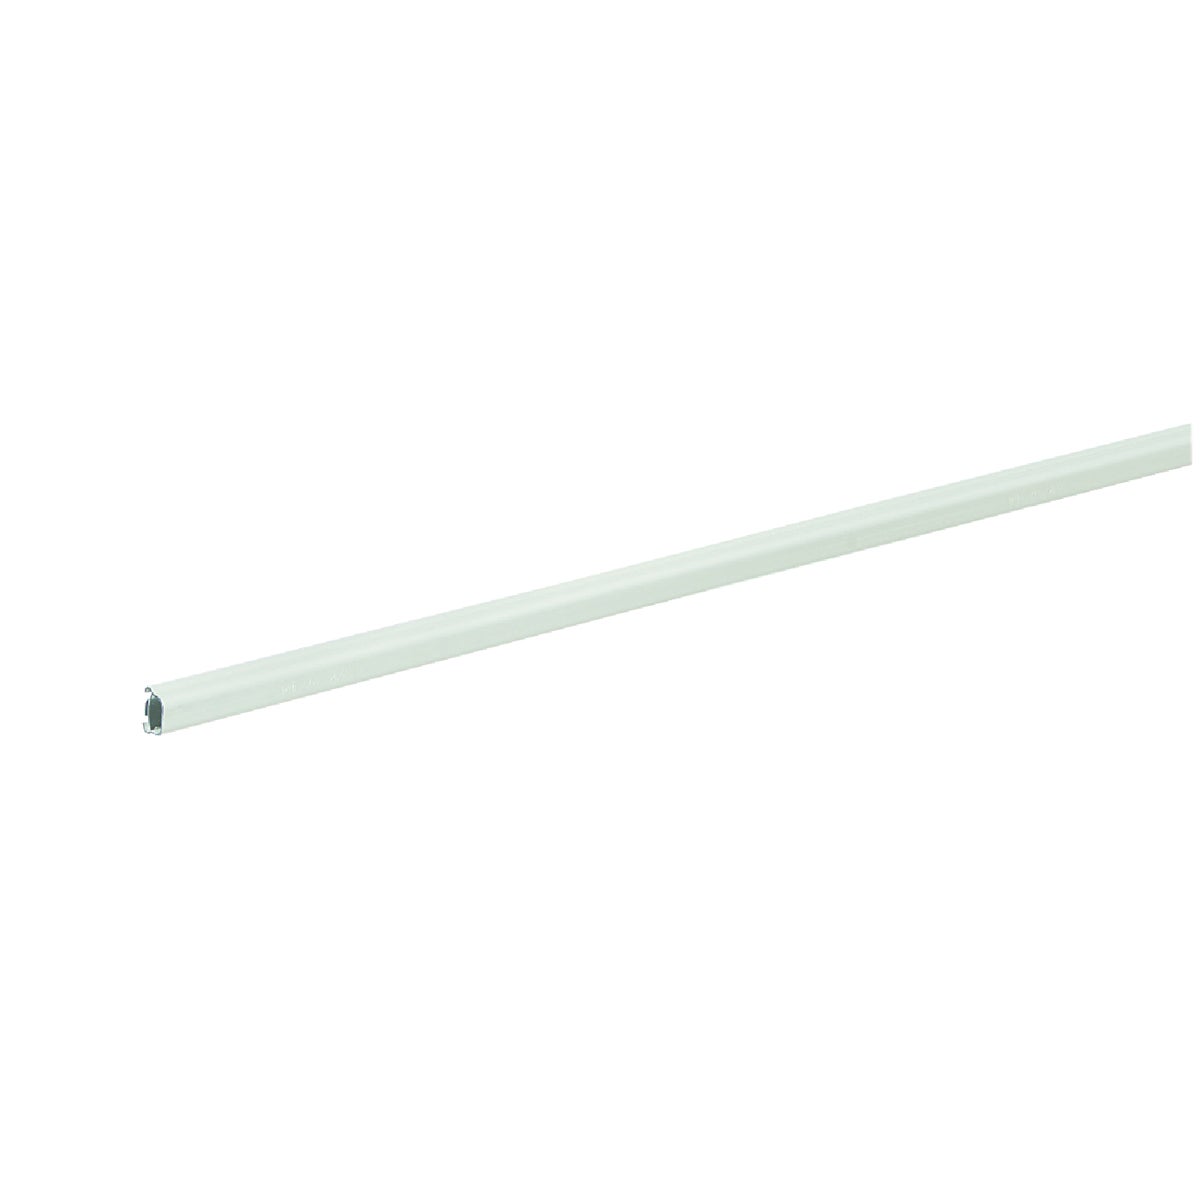 Wiremold 3/4 In. x 5 Ft. Ivory Channel